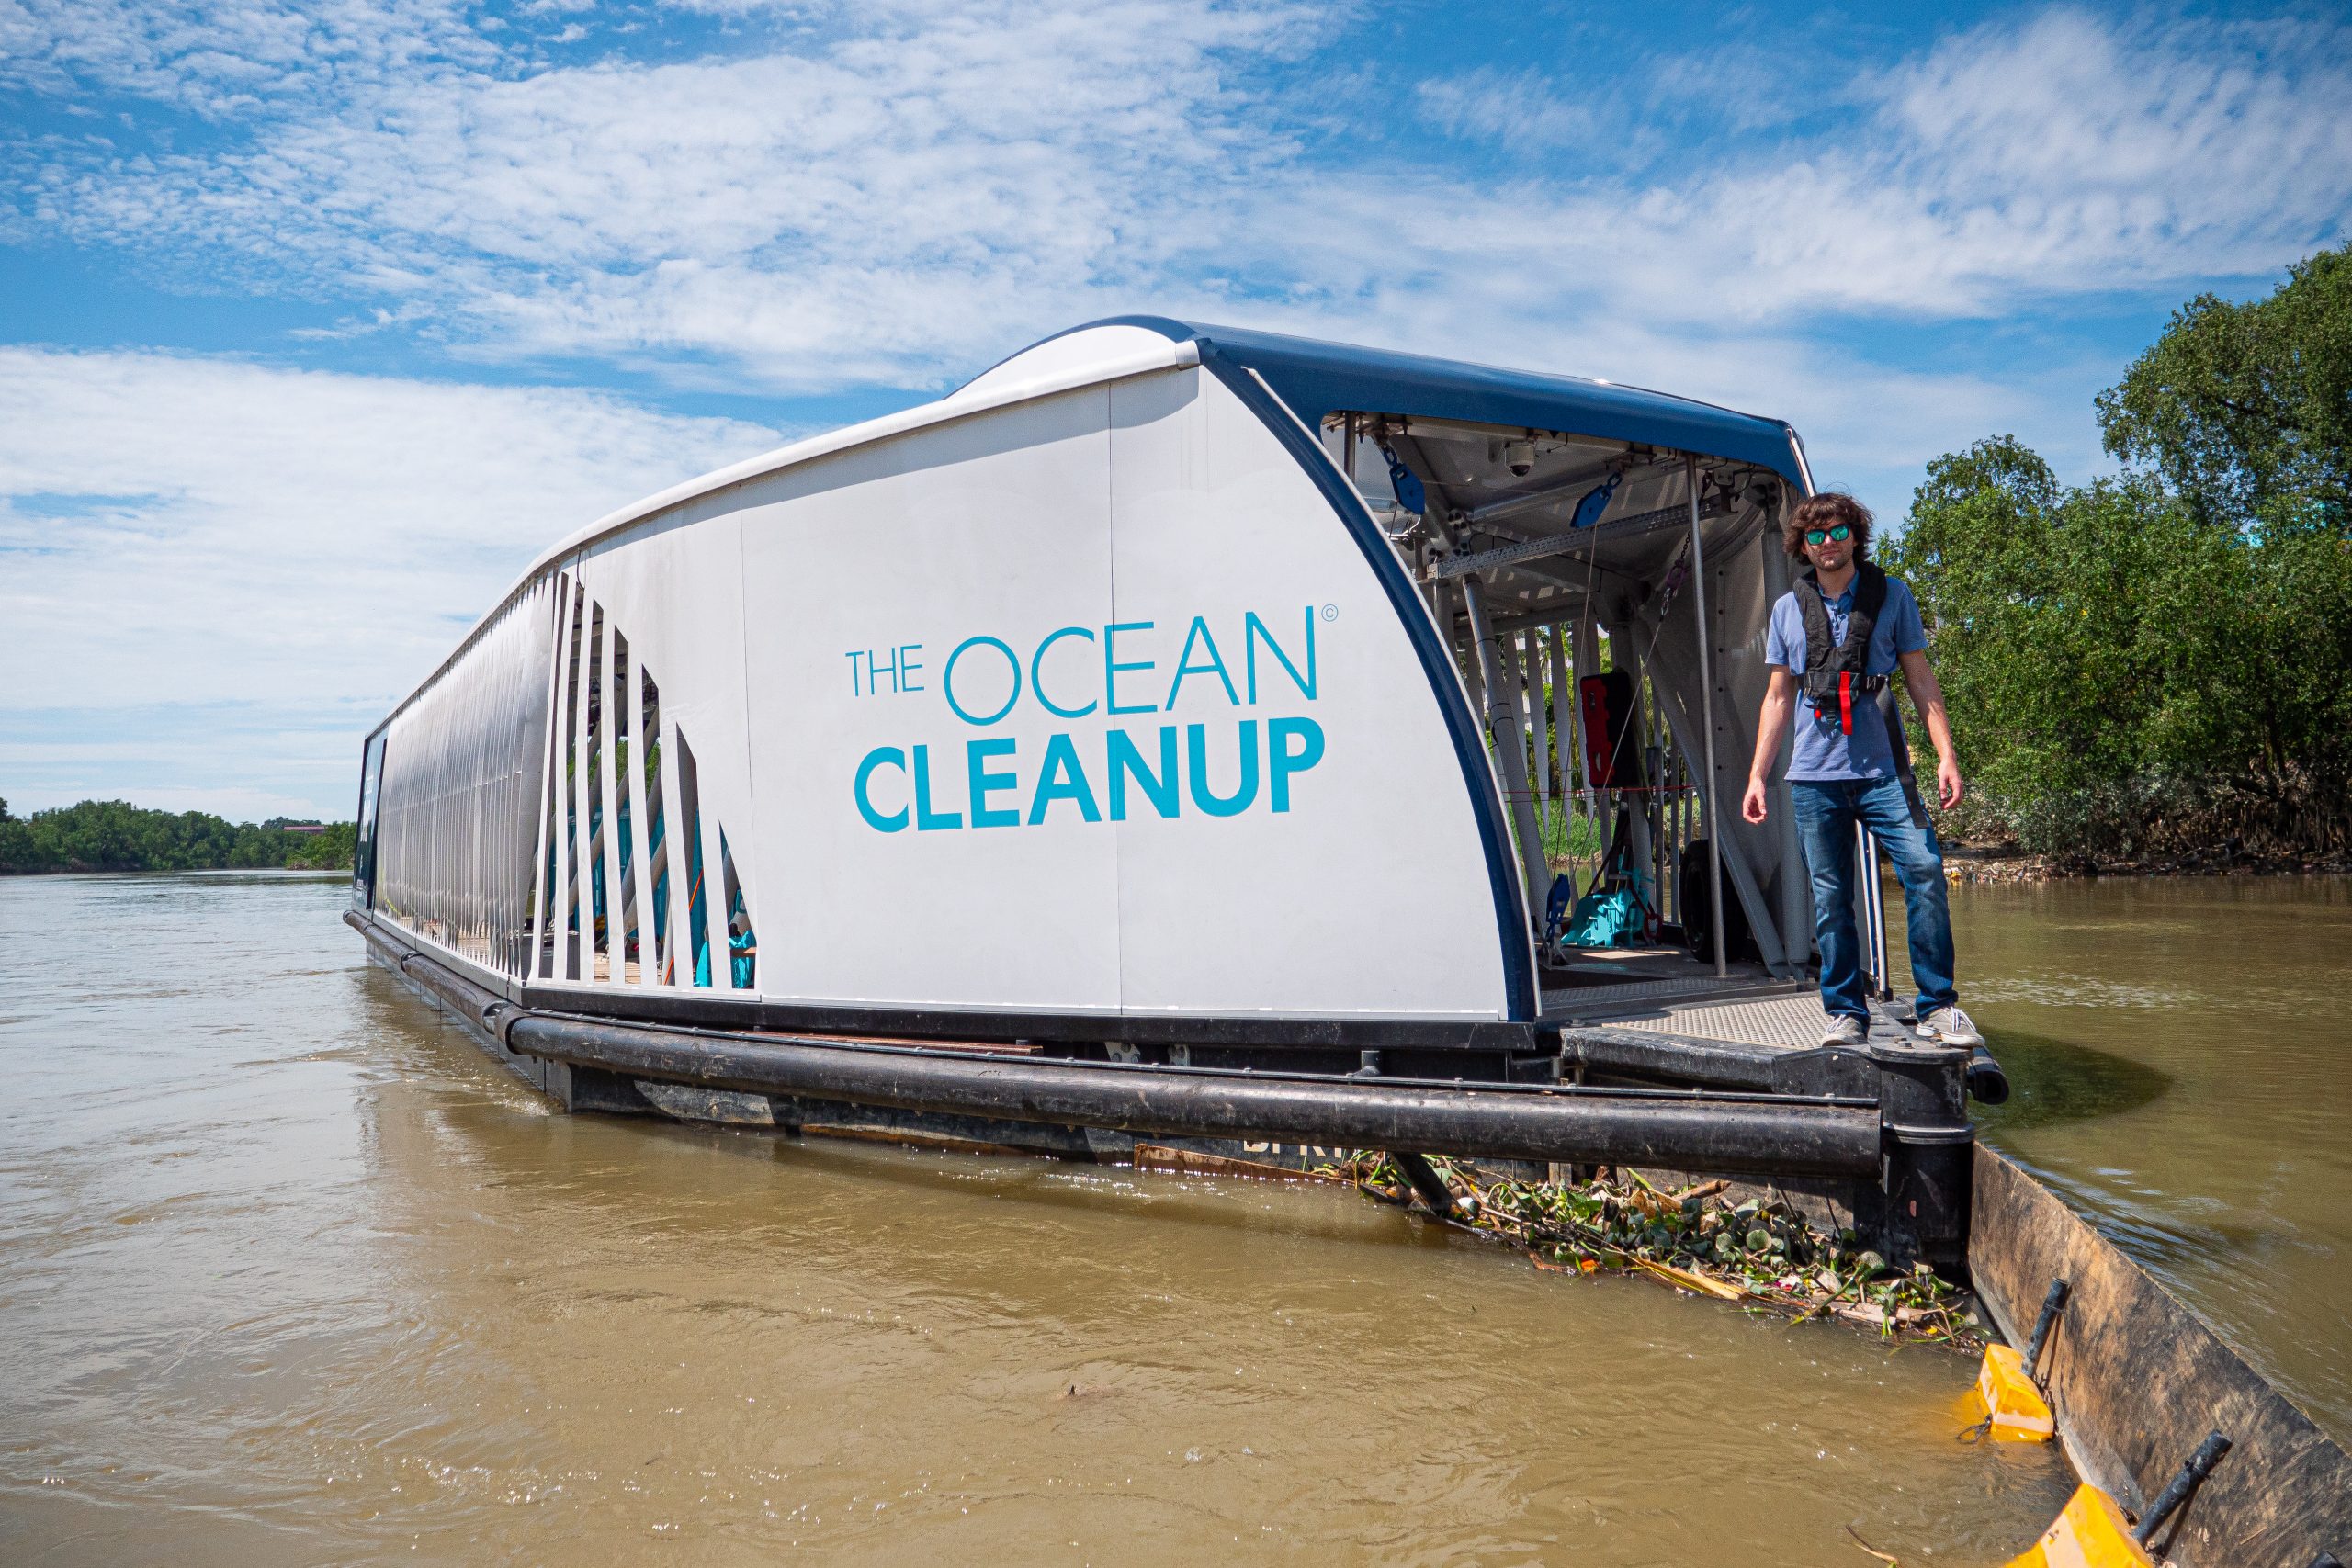 Boyan Slat • Founder and CEO of The Ocean Cleanup